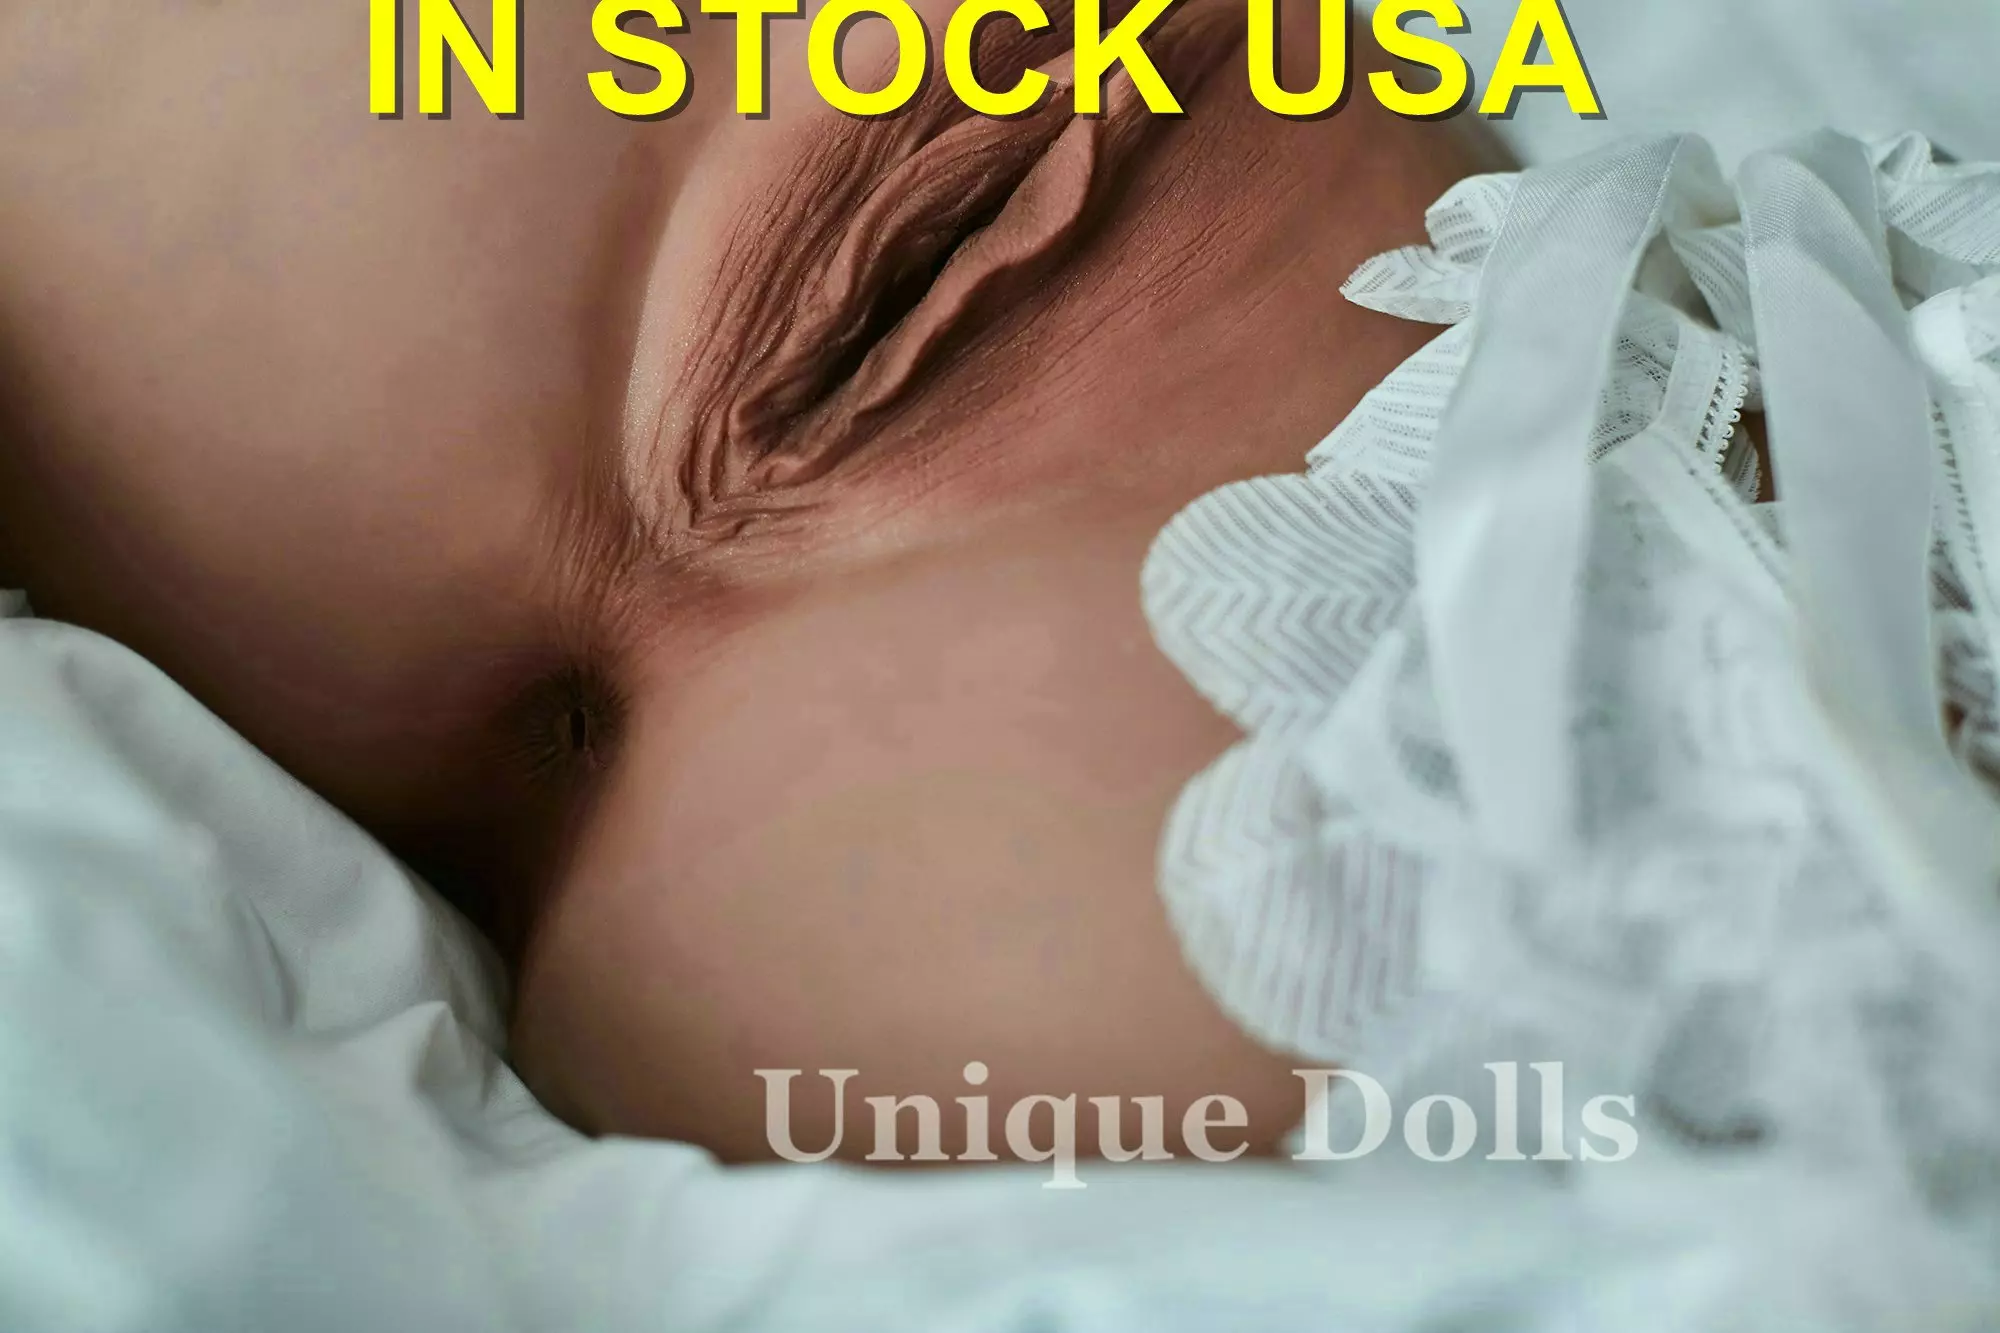 CLM Doll R5 Portable Sexy ass sex Doll in stock